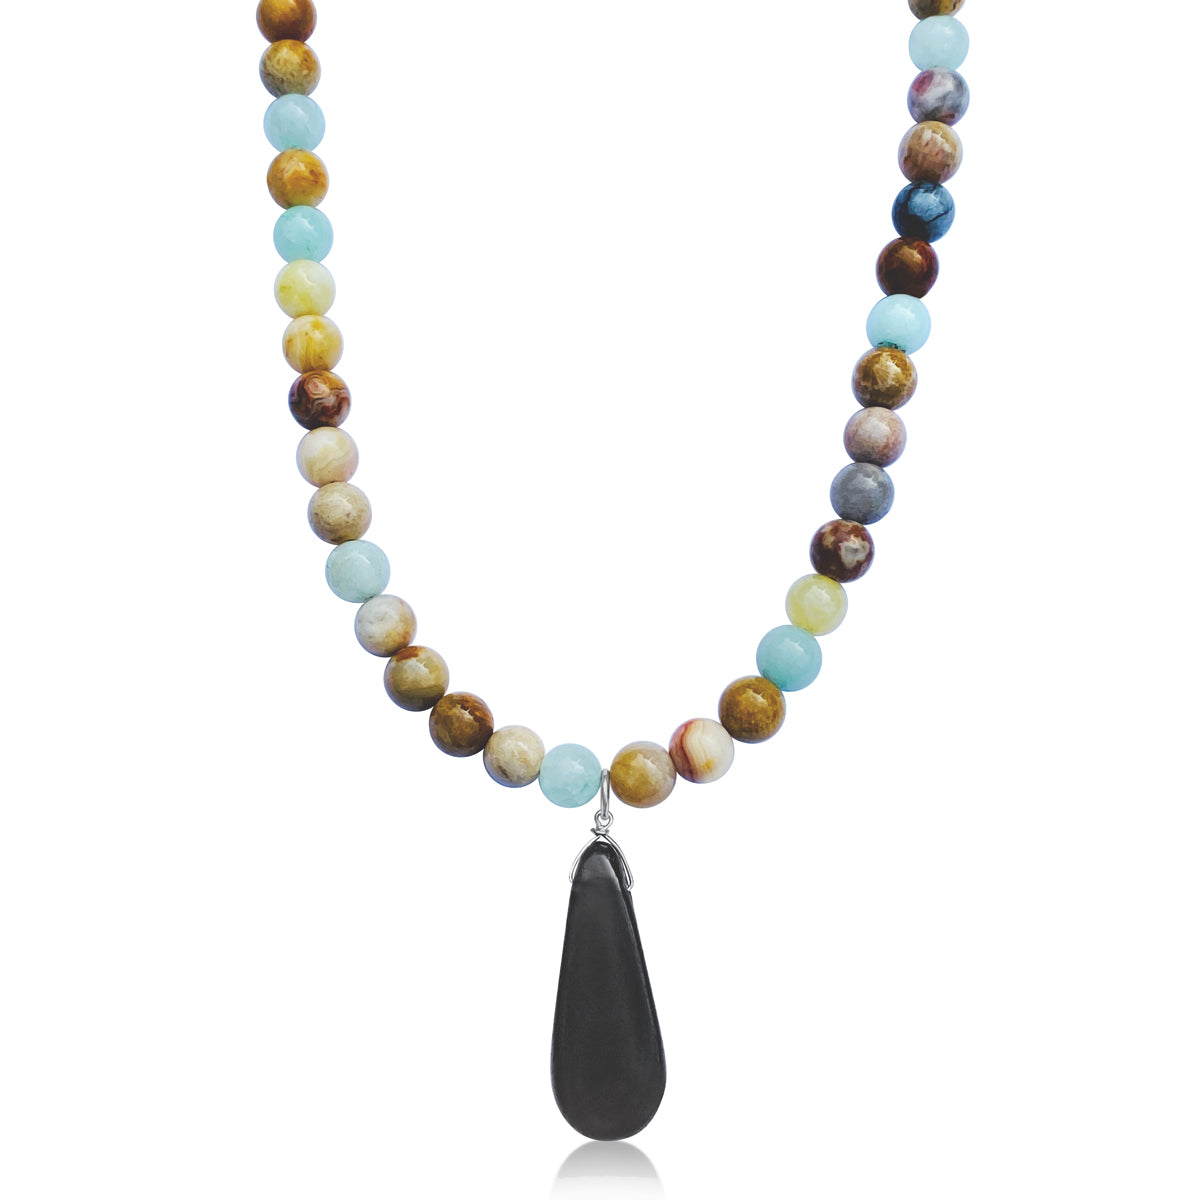 Gemstone Necklace for Authenticity - Jasper, Amazonite and Smoky Quartz Crystals for understanding self worth and practicing self empowerment. "To be yourself in a world that is constantly trying to make you something else is the greatest accomplishment." Ralph Waldo Emerson